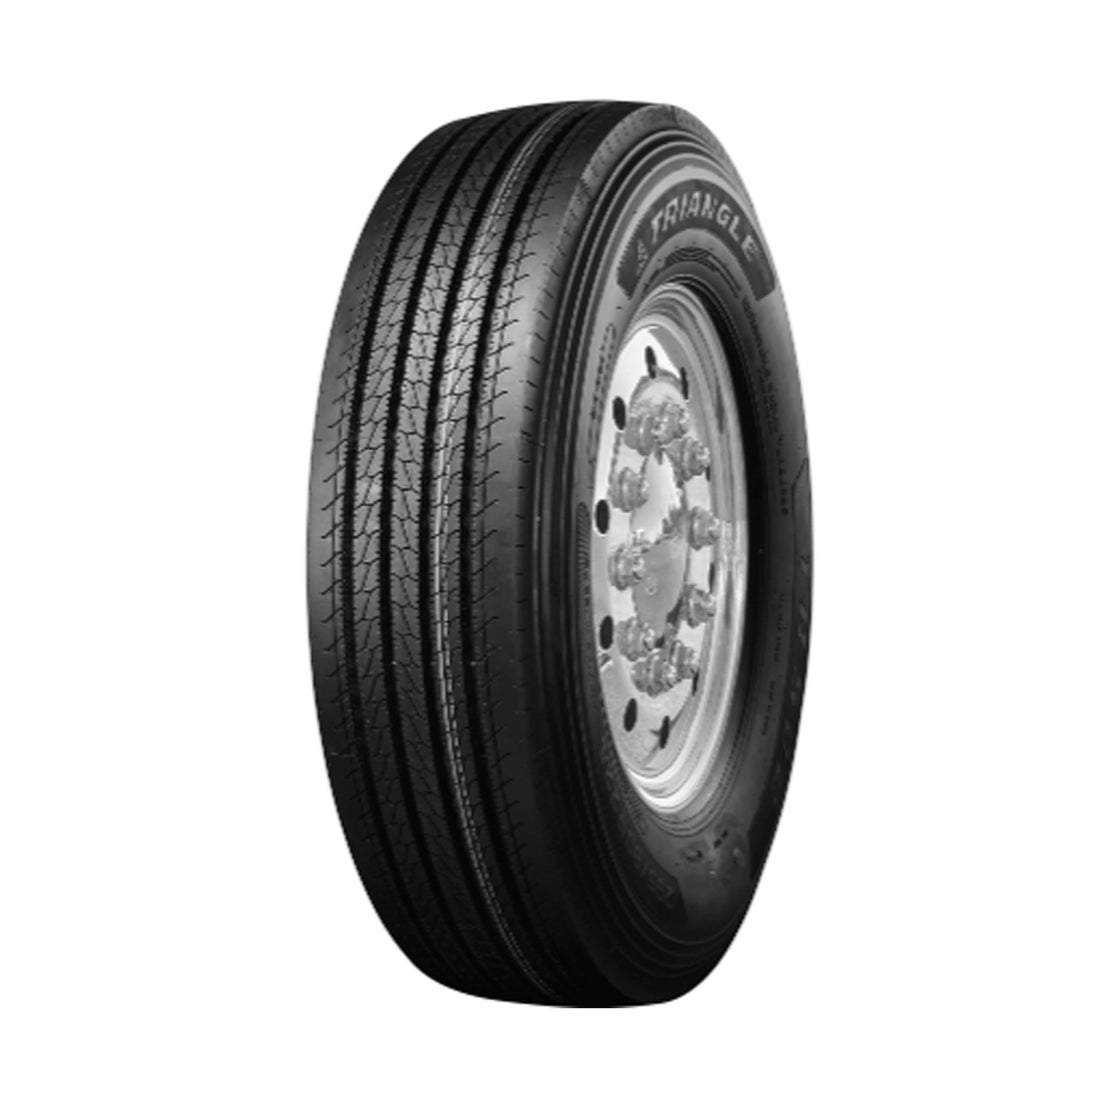 295/75R22.5 14PR G 144M Triangle TRS02 All Position TL New From OTRUSA.COM